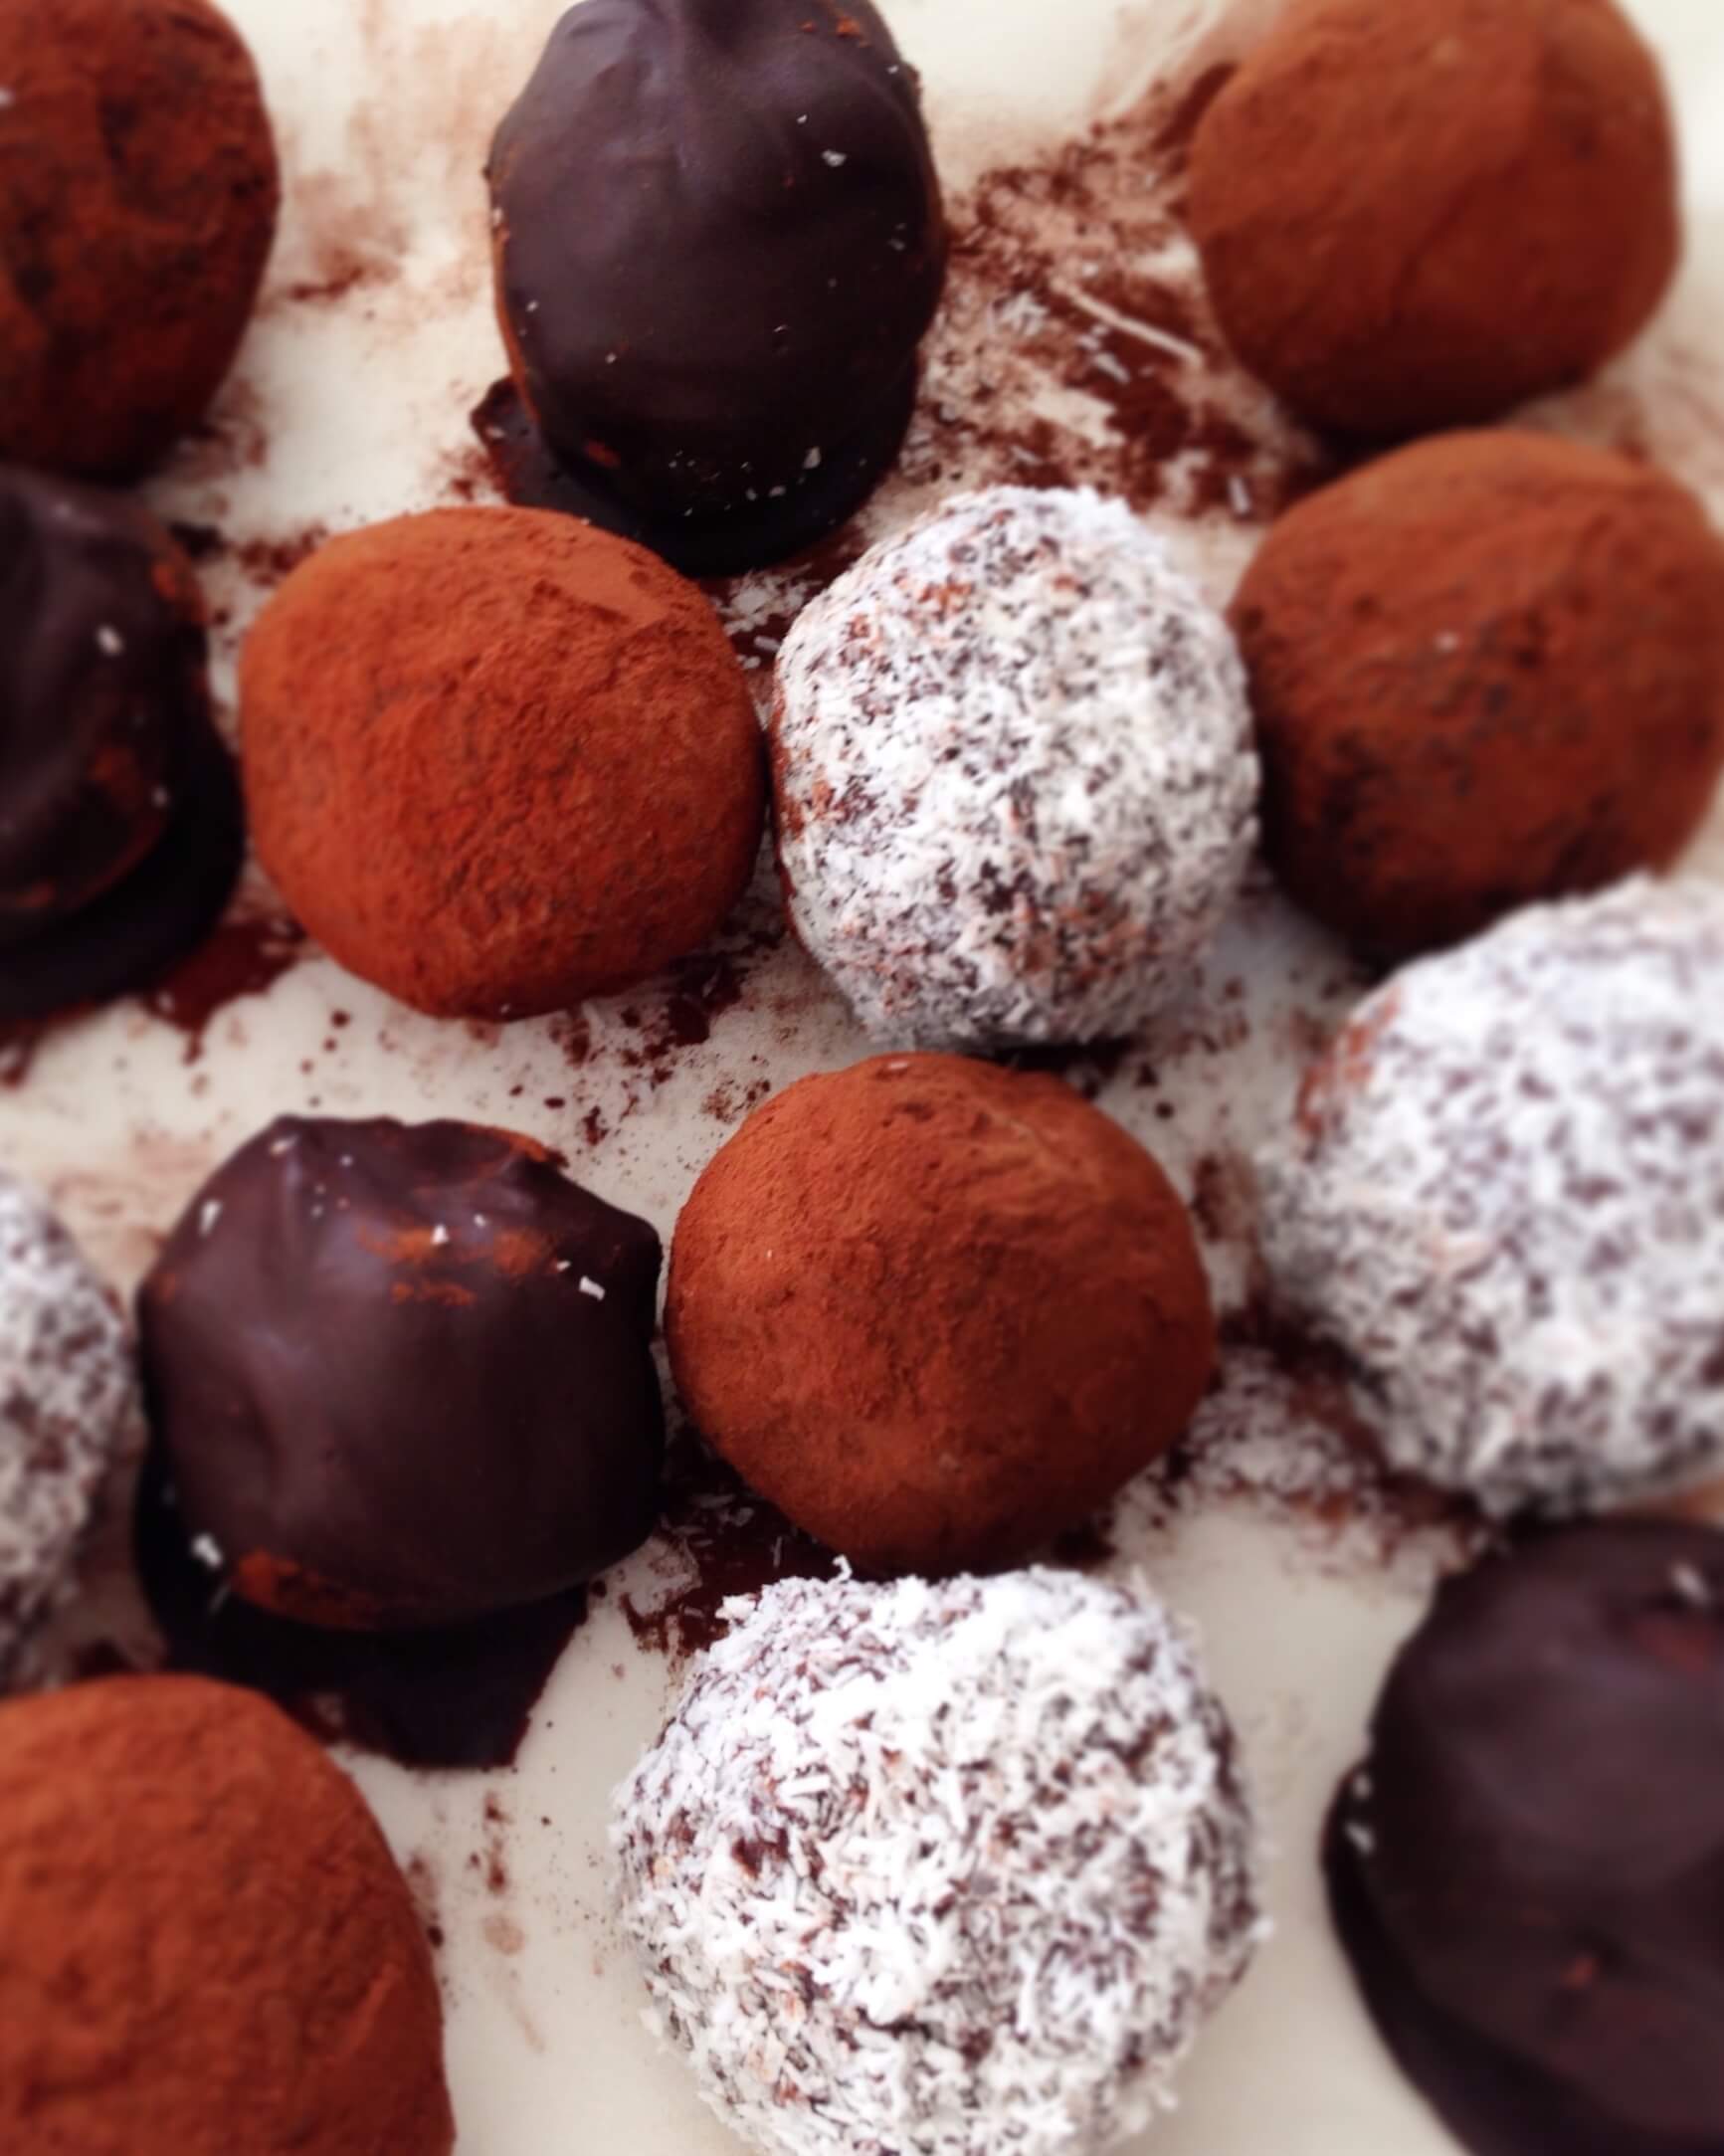 Try these easy to make chocolate truffles for an indulgent special occasion treat